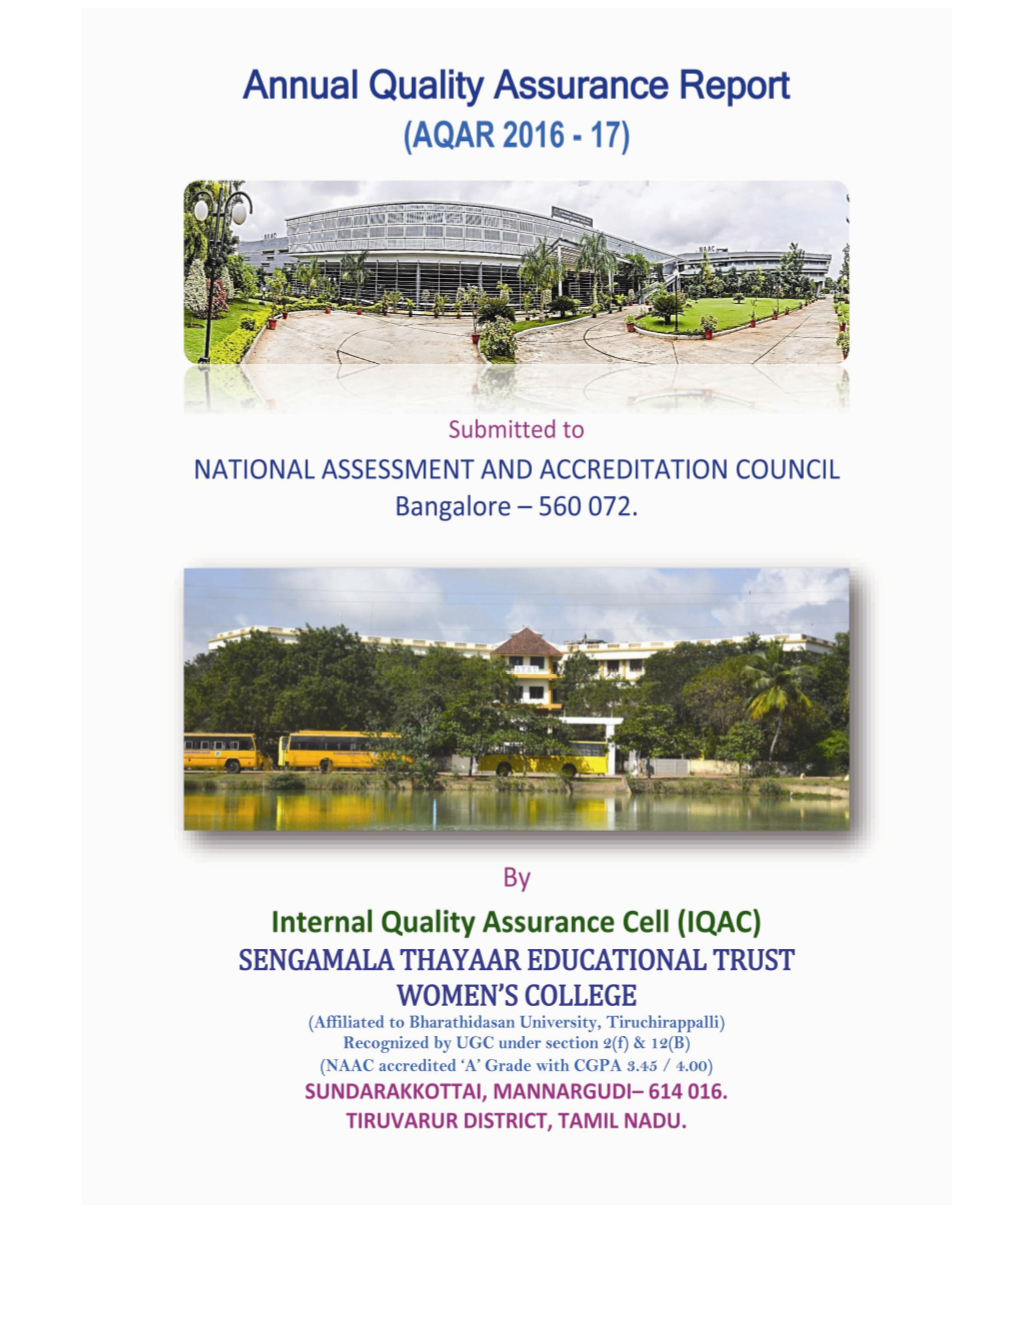 2. Annual Quality Assurance Report